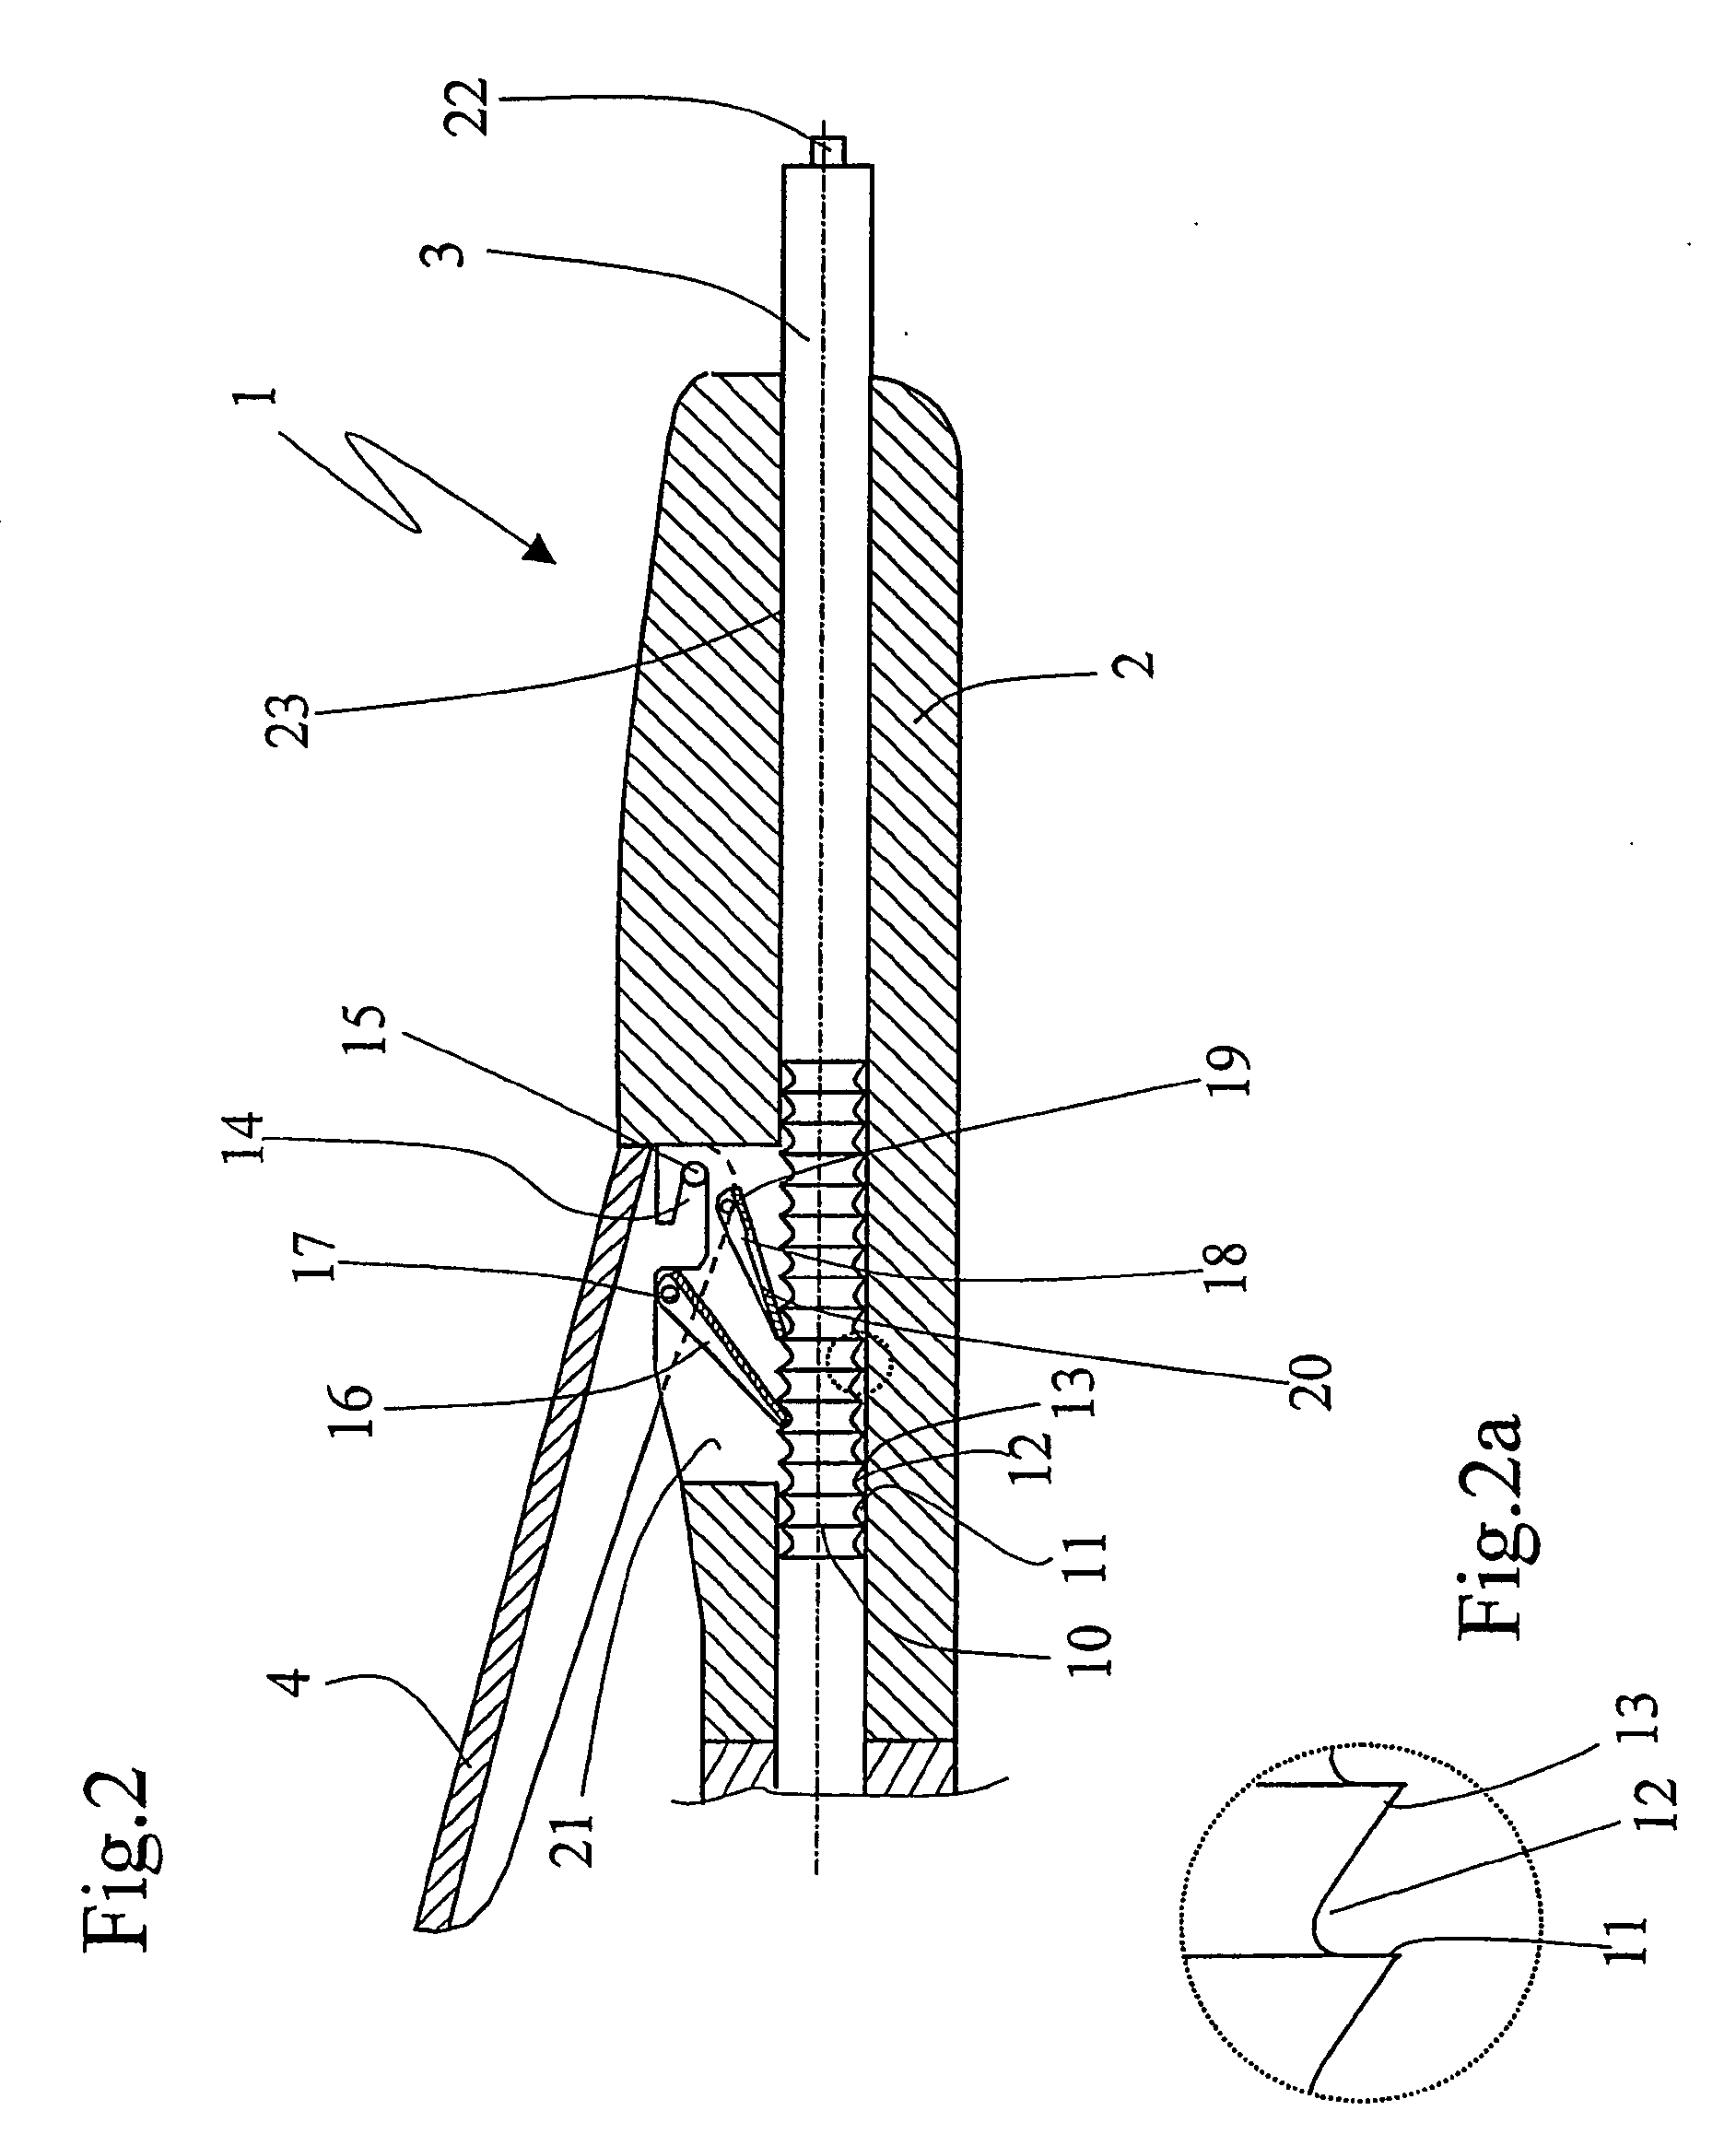 Device for expelling a liquid or pasty substance